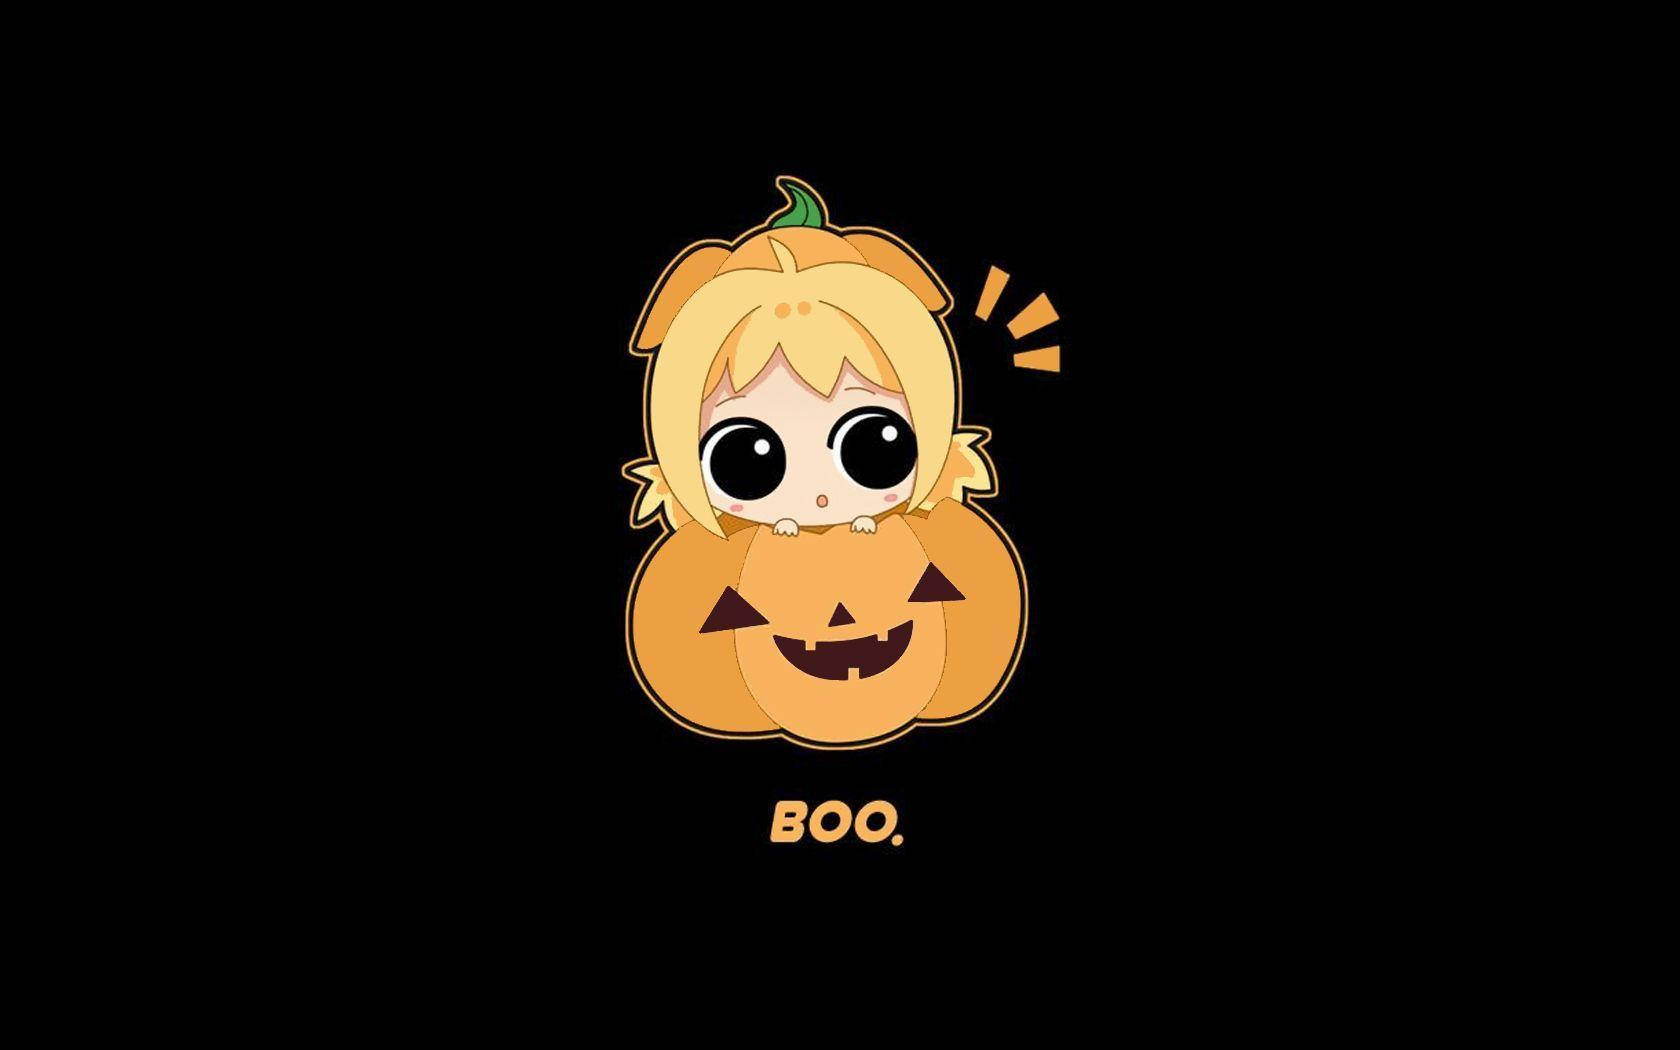 Trick-or-treat from the comfort of your screen with this festive Halloween Ipad! Wallpaper